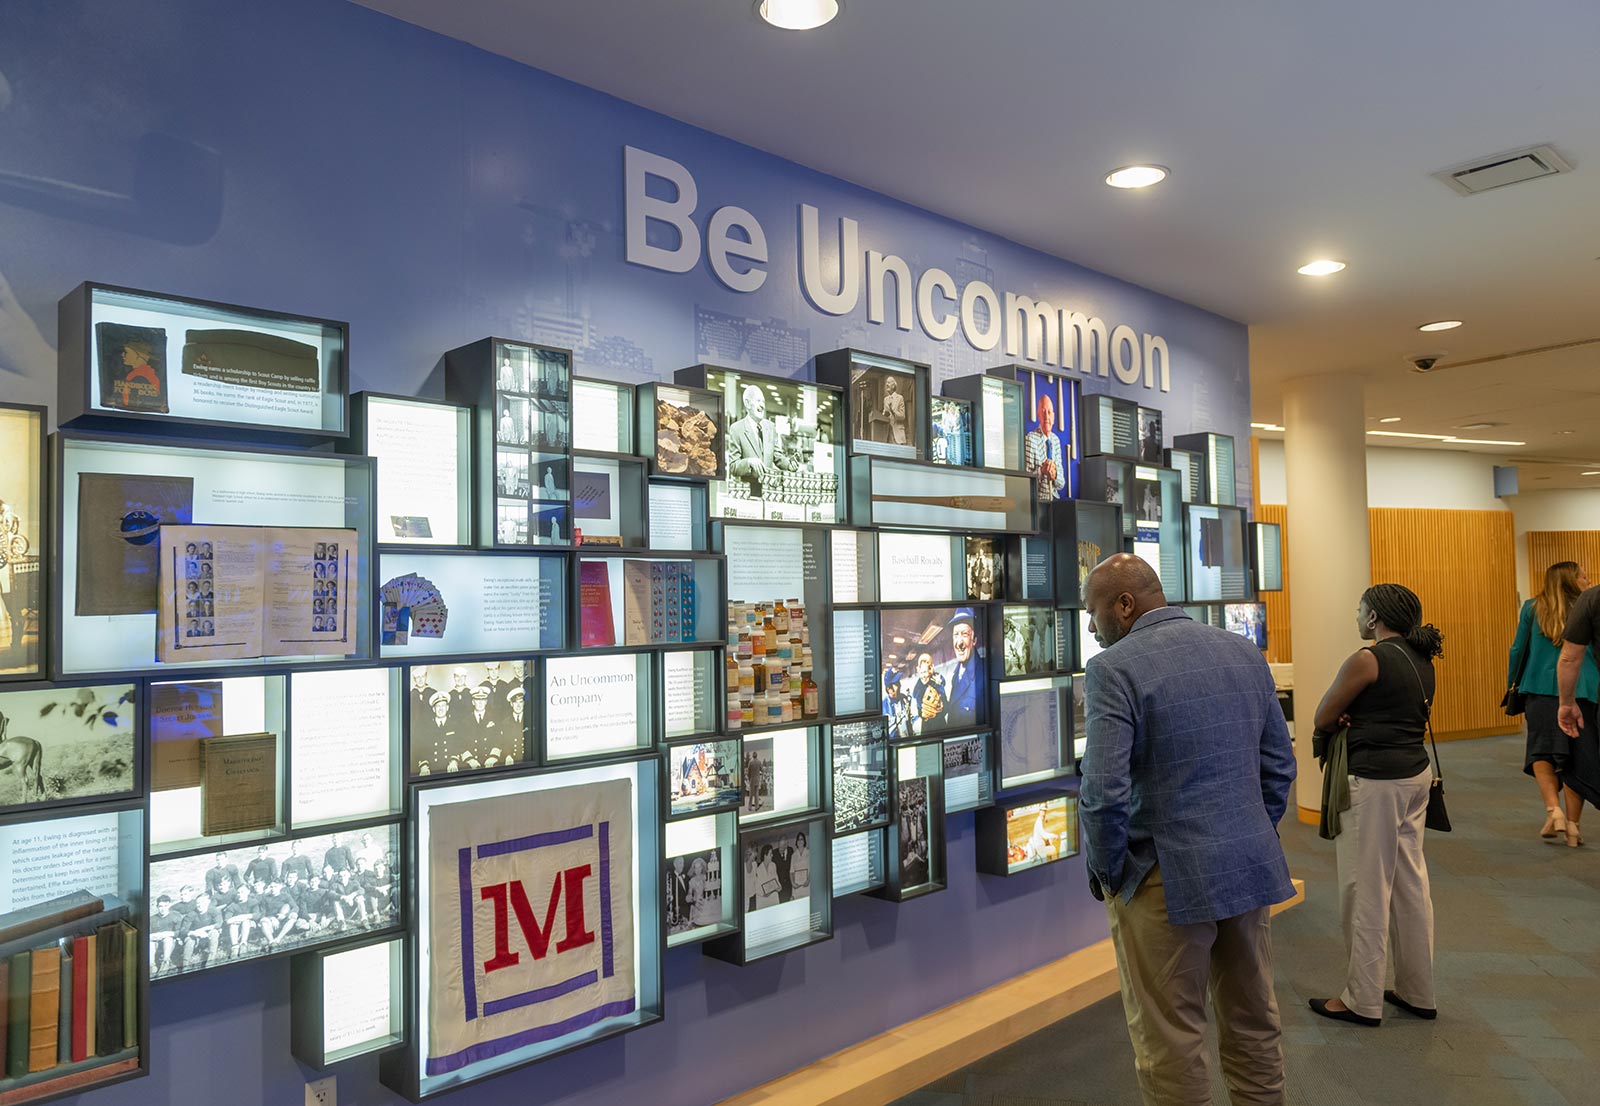 The Ewing Marion Kauffman legacy wall, "Be Uncommon", at the Kauffman Foundation Conference Center.